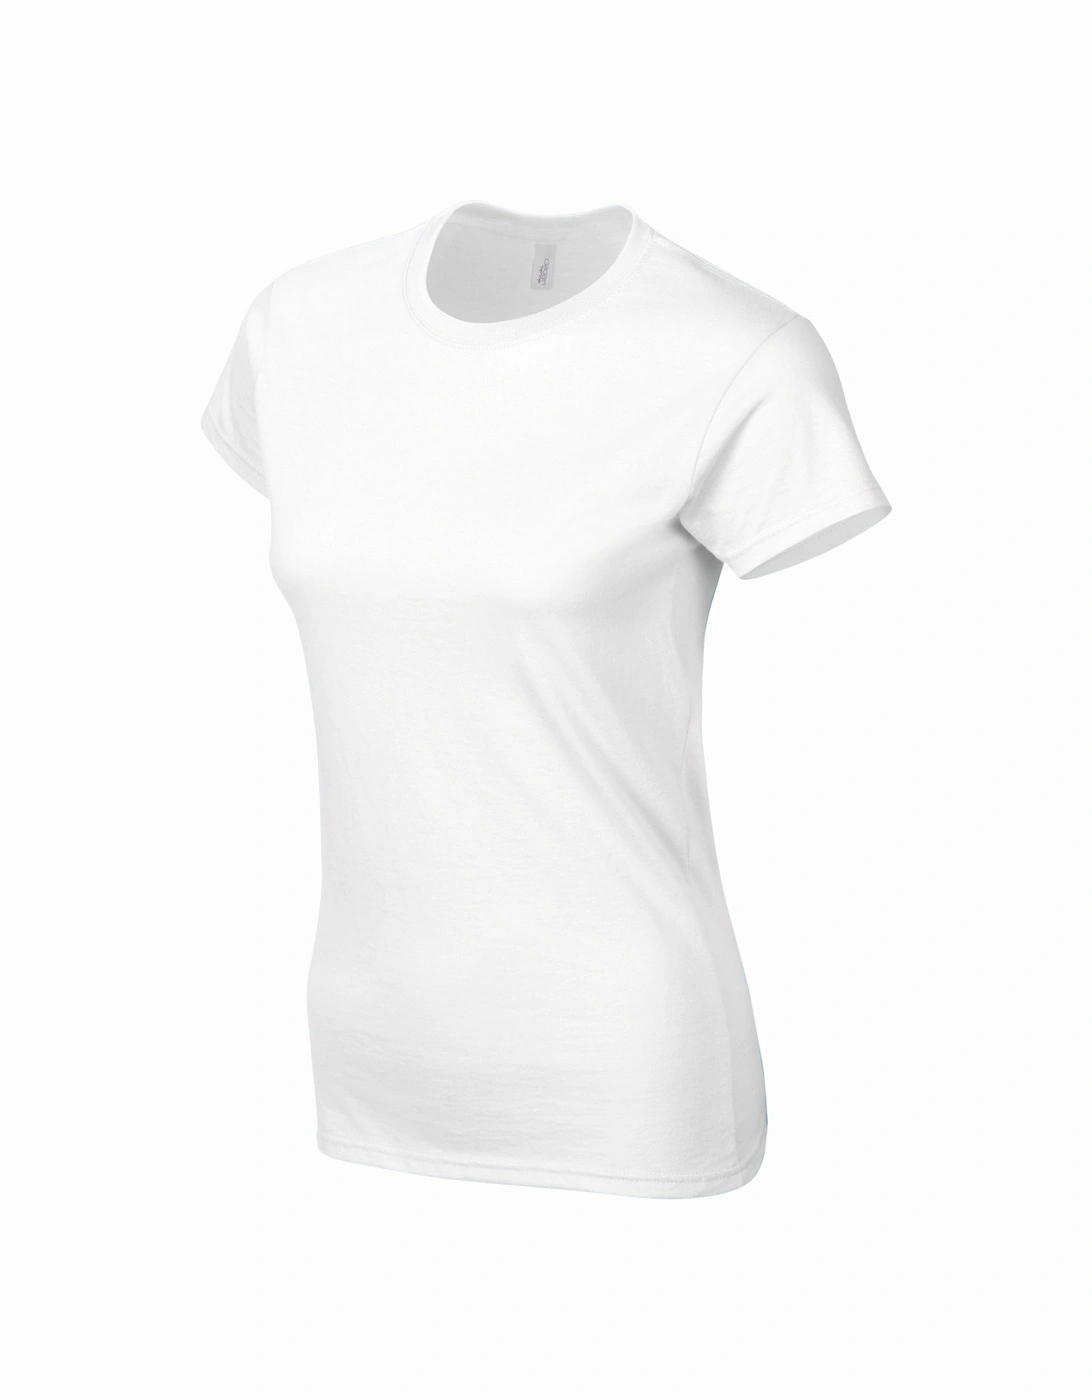 Womens/Ladies Ringspun Cotton Soft Touch Fitted T-Shirt